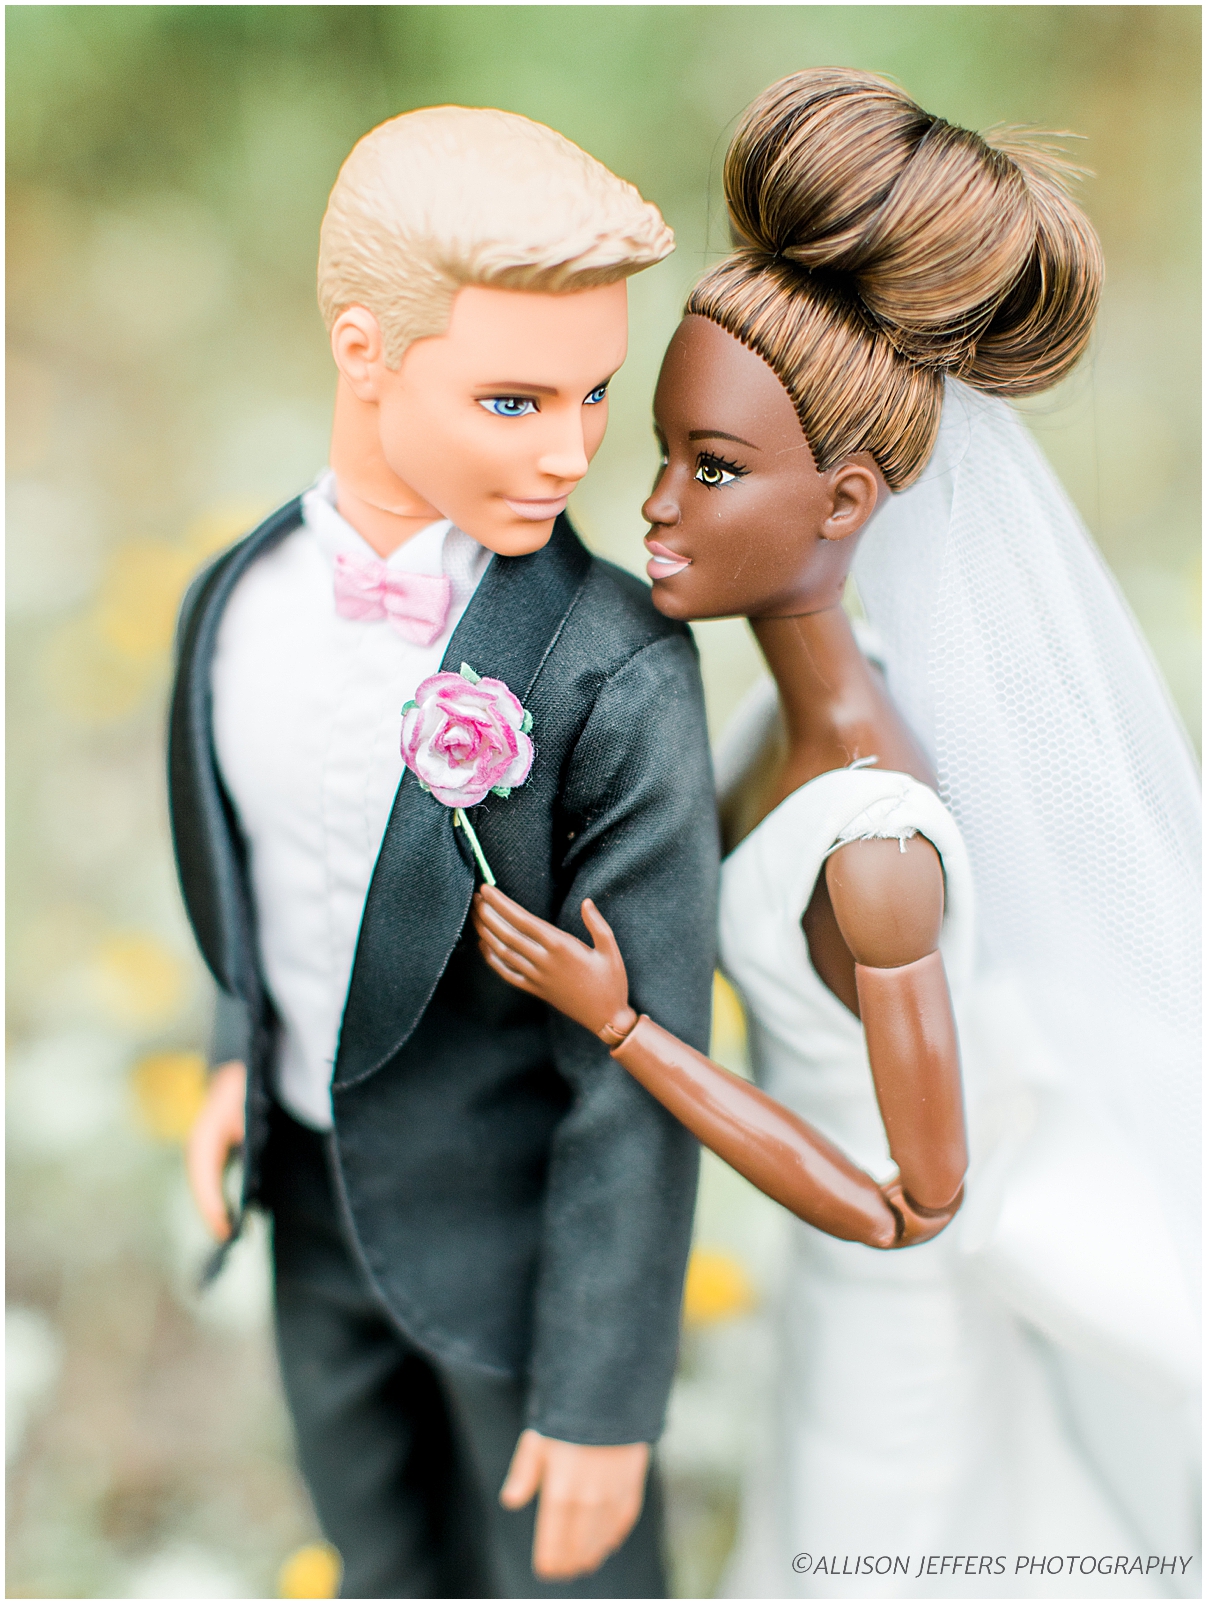 Barbie and Ken dream wedding photography styled shoot by Allison Jeffers Photography 0117